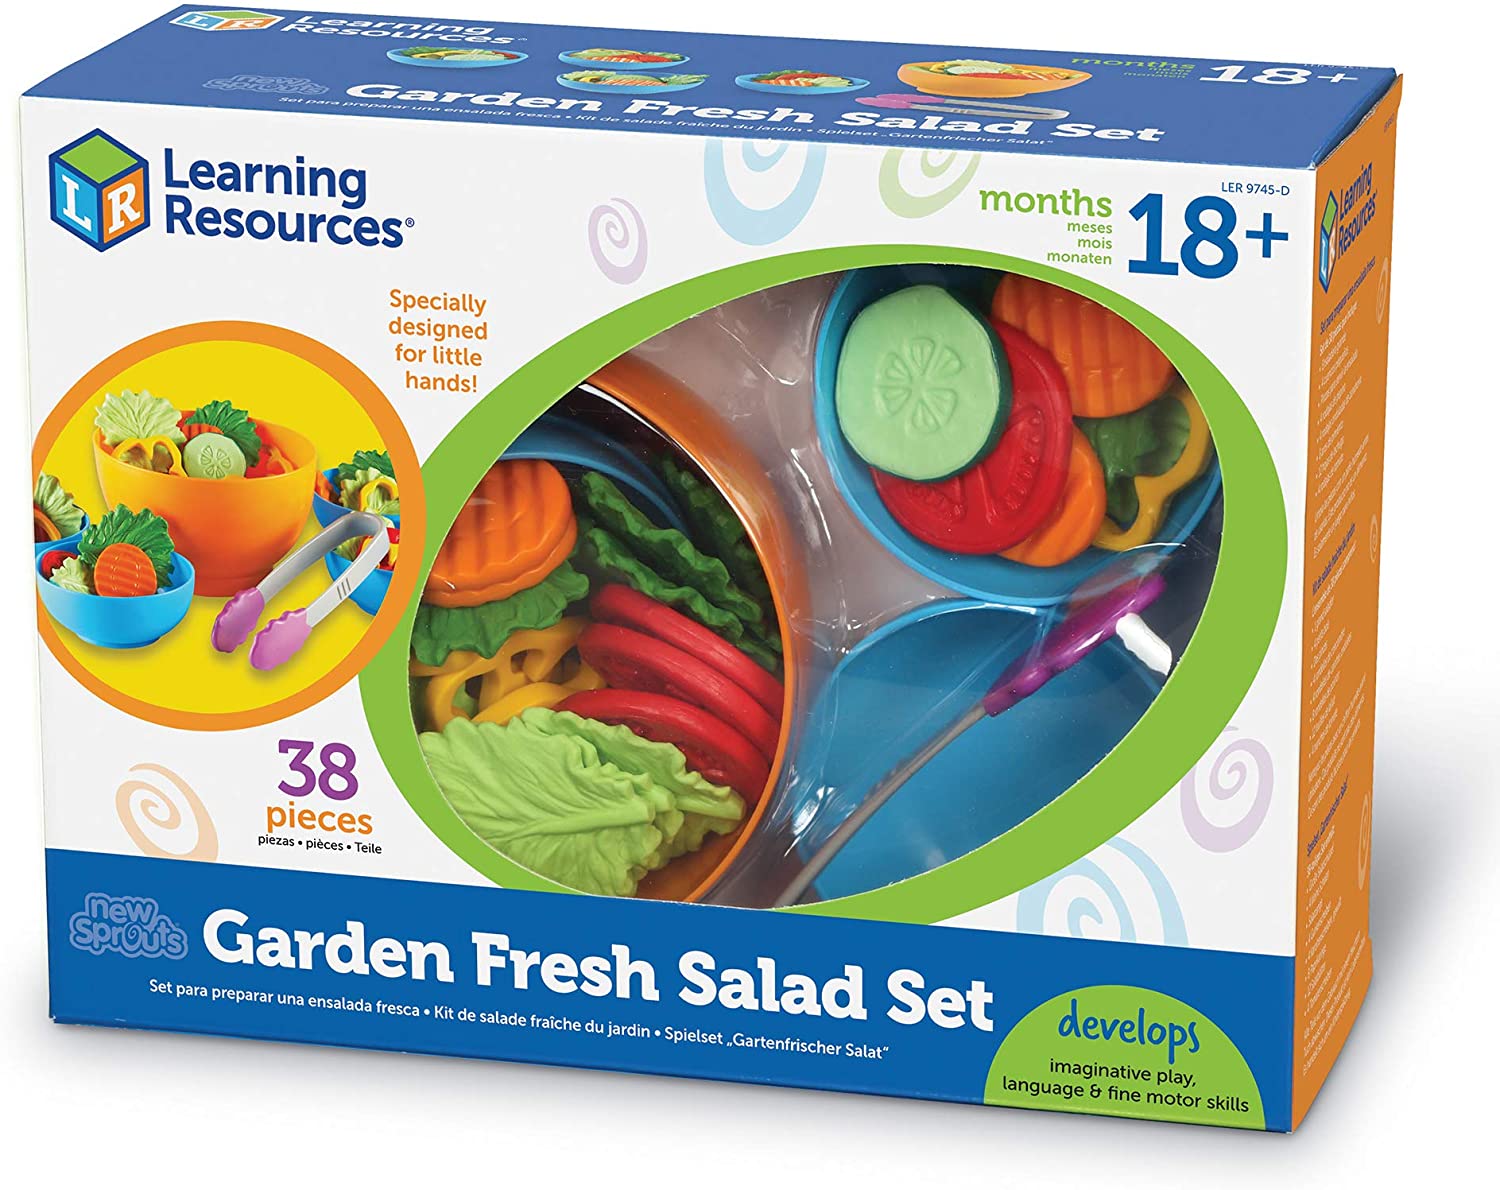 New Sprouts Fresh Salad Toy Set